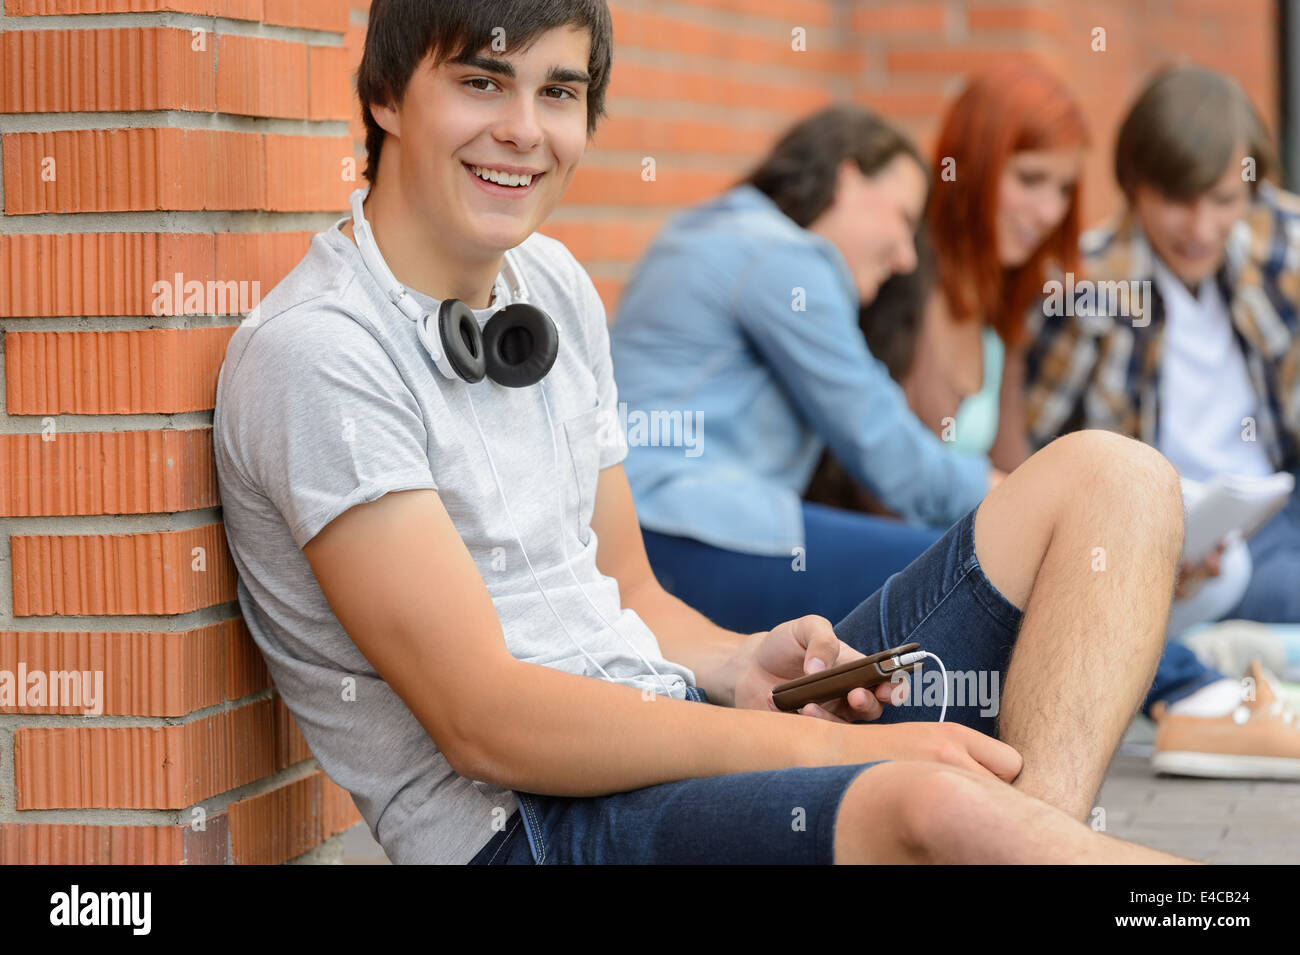 College student boy sitting on ground with friends hanging out Stock Photo